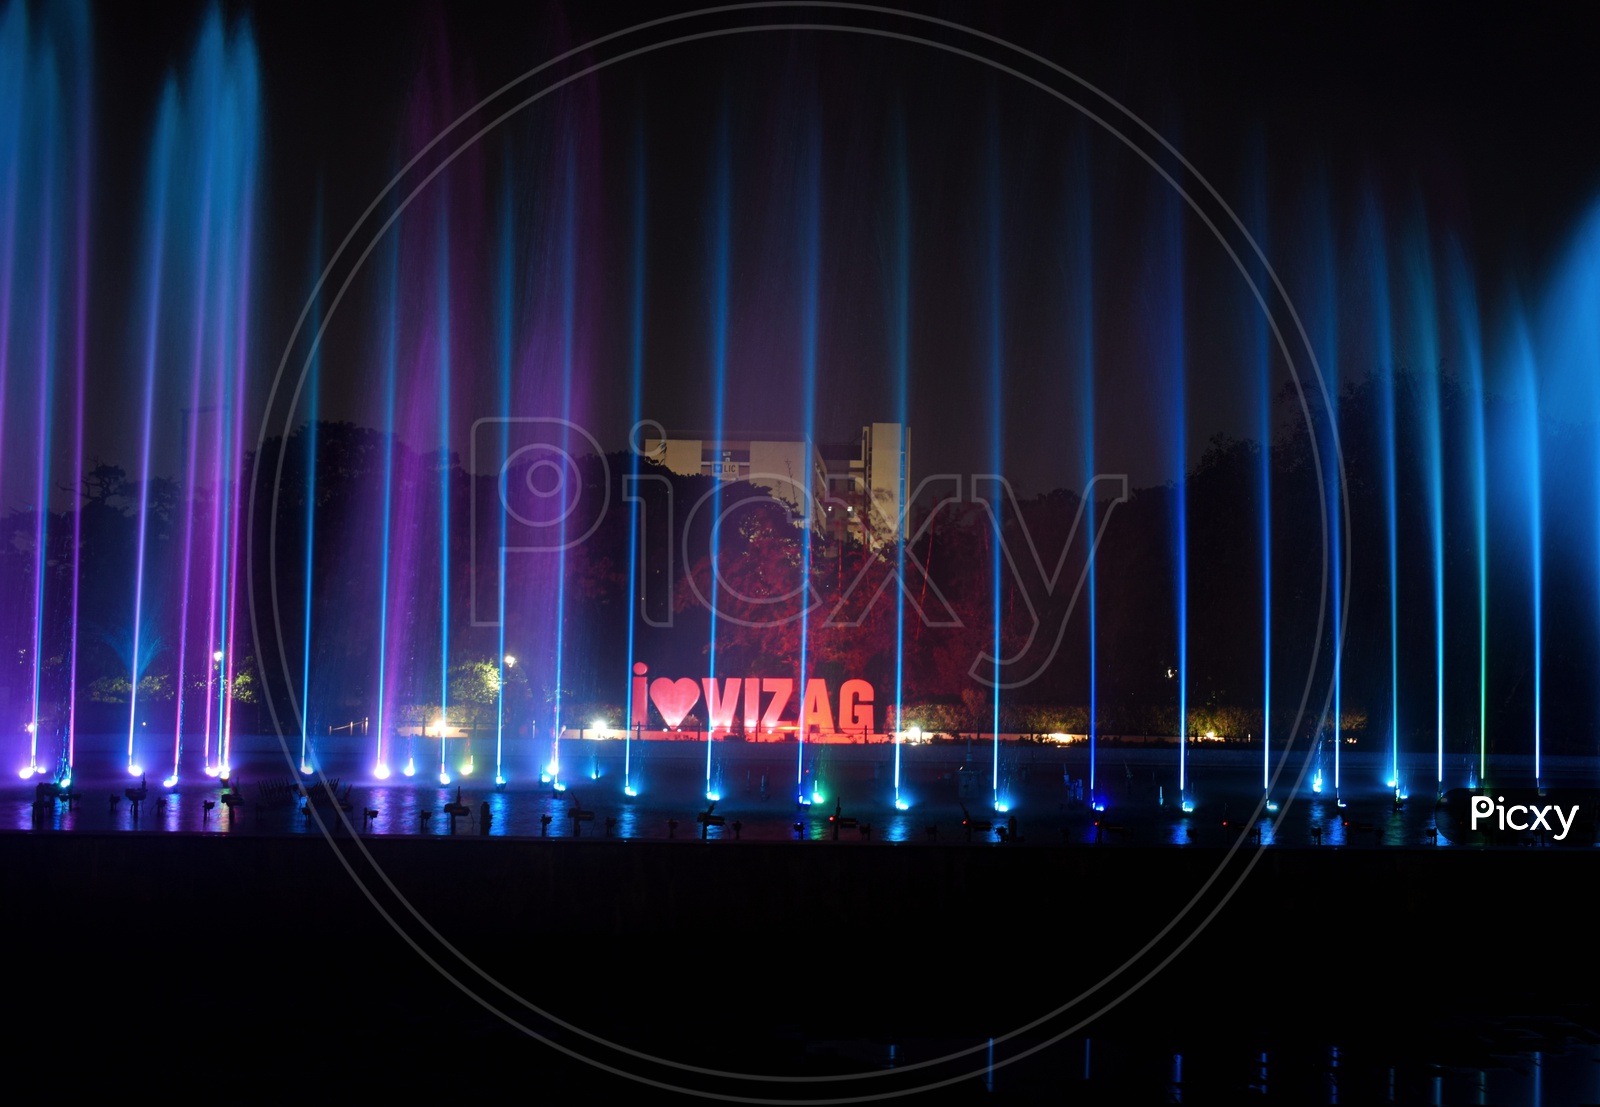 Vizag music fountain visual effect lighting neon light stage electric blue